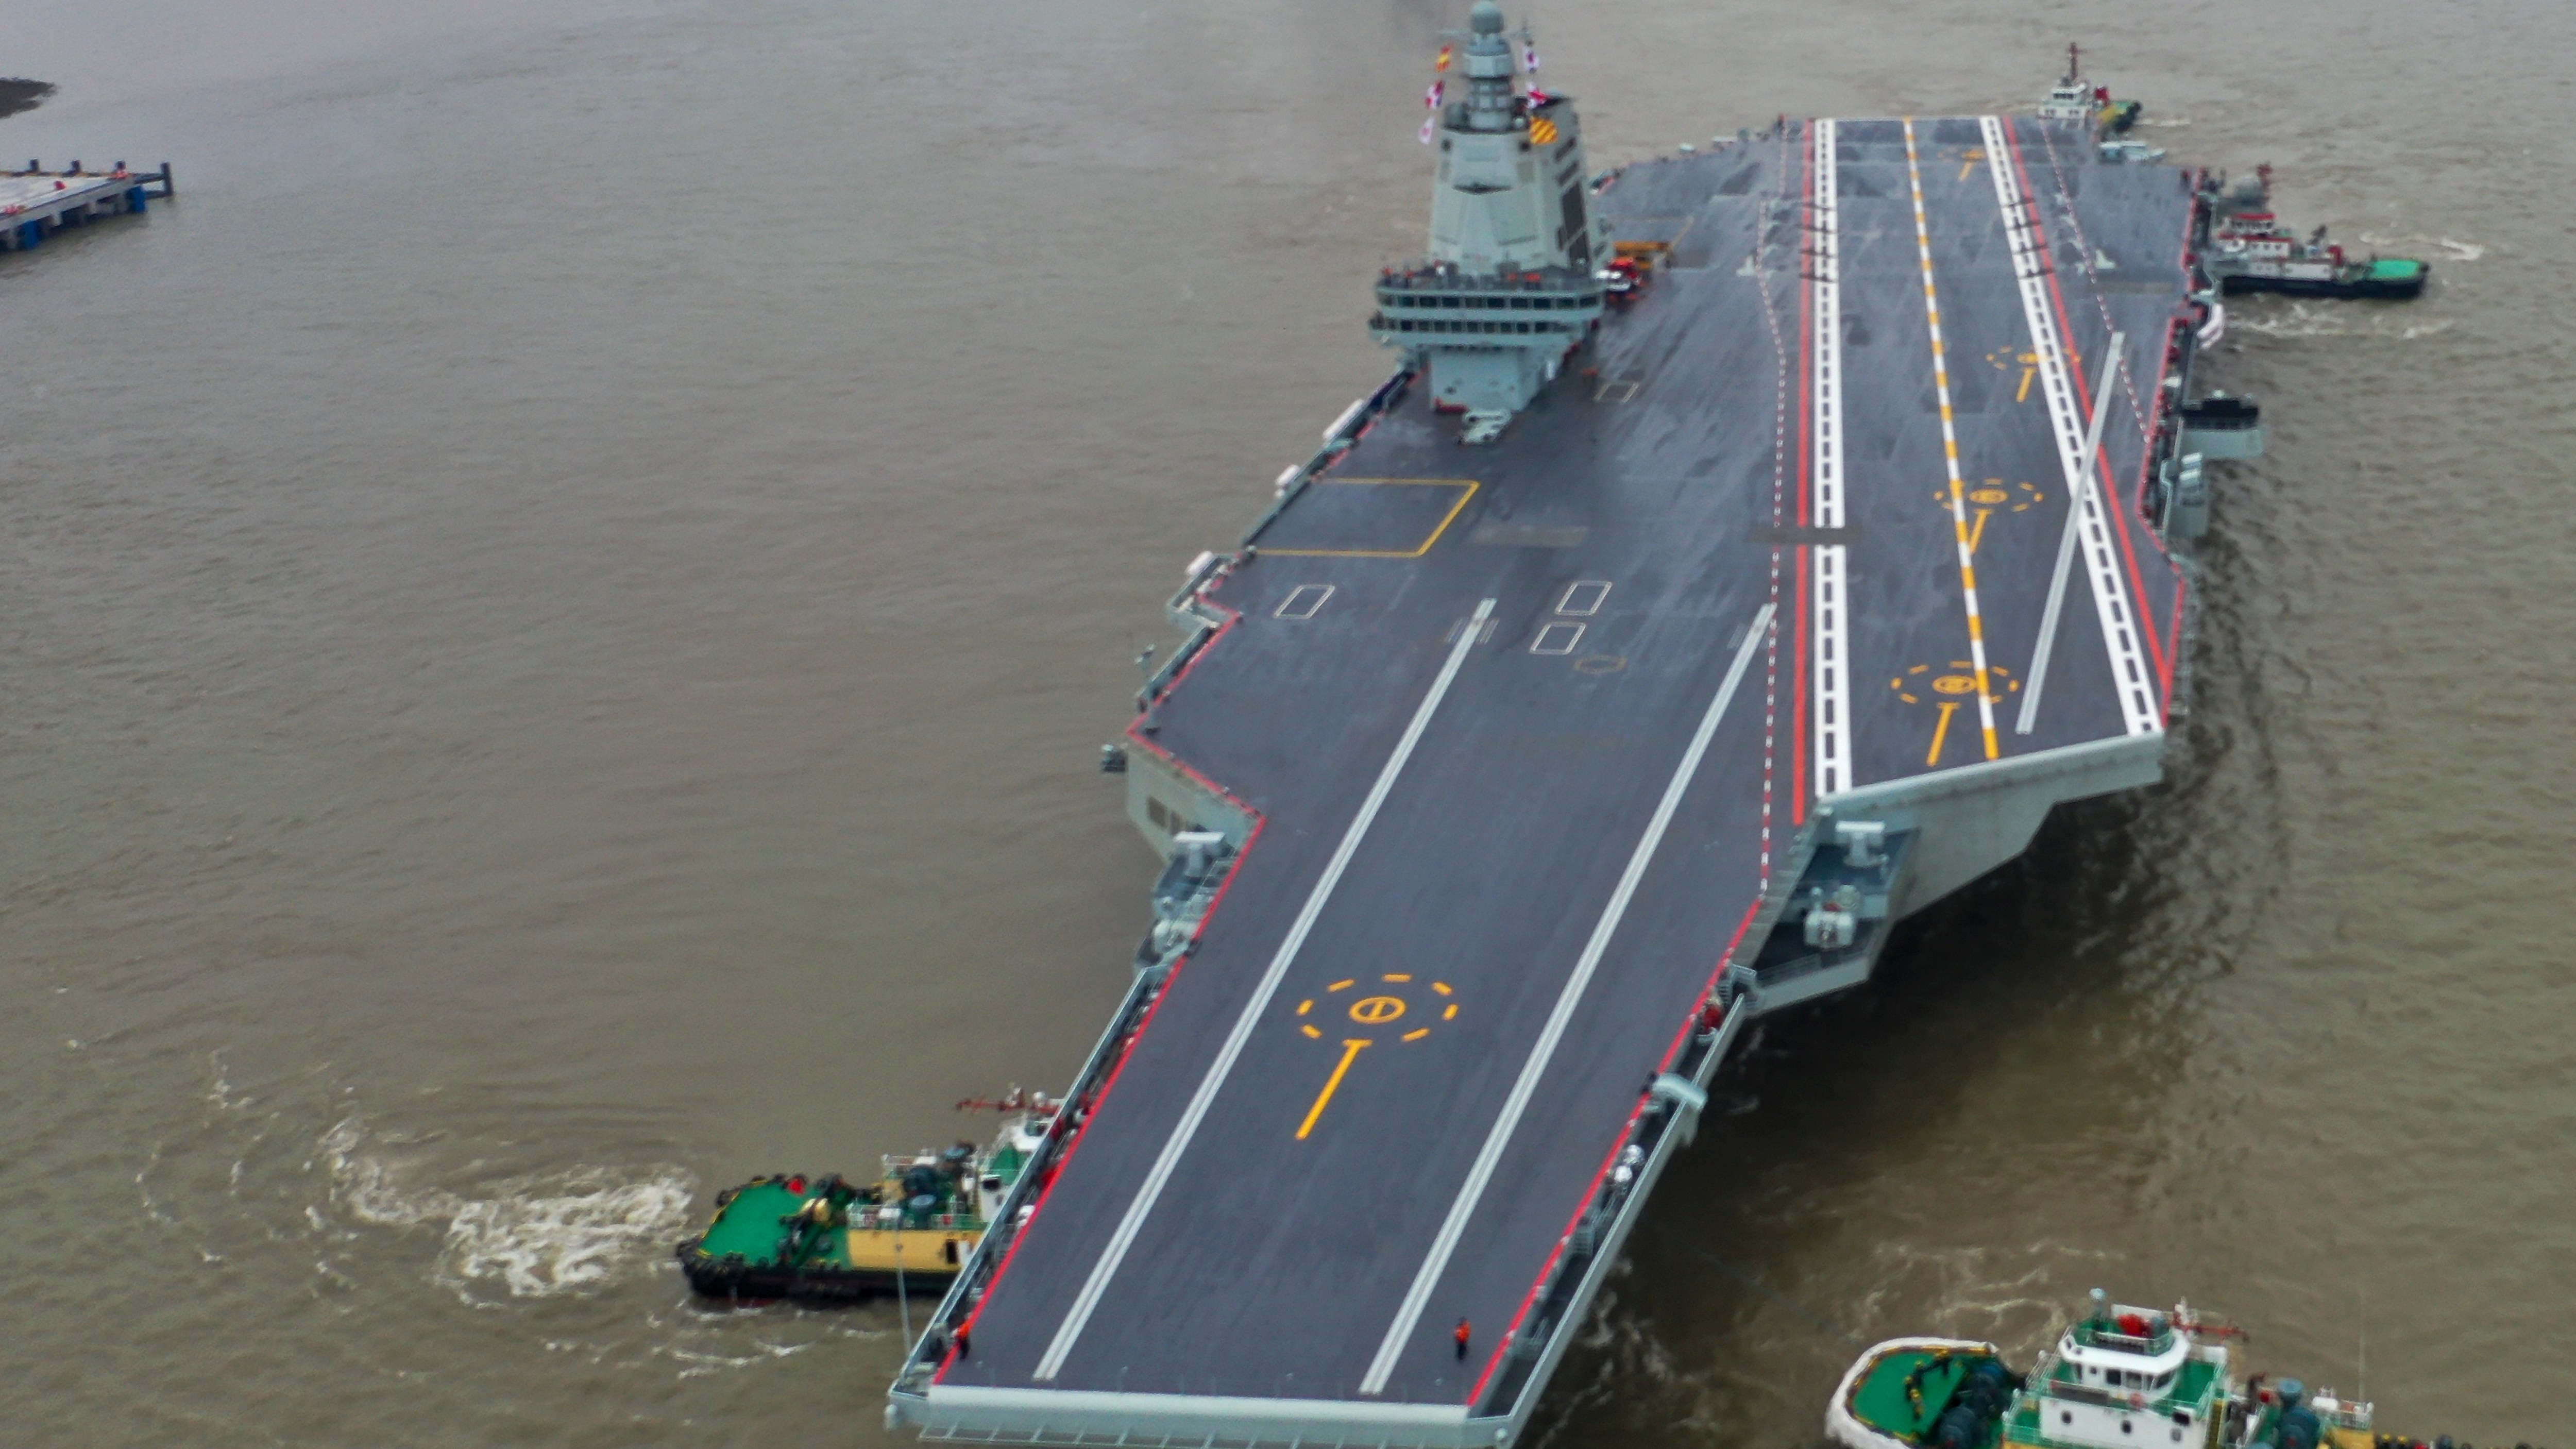 The Fujian leaves Jiangnan shipyard in Shanghai. It is expected to go into service next year